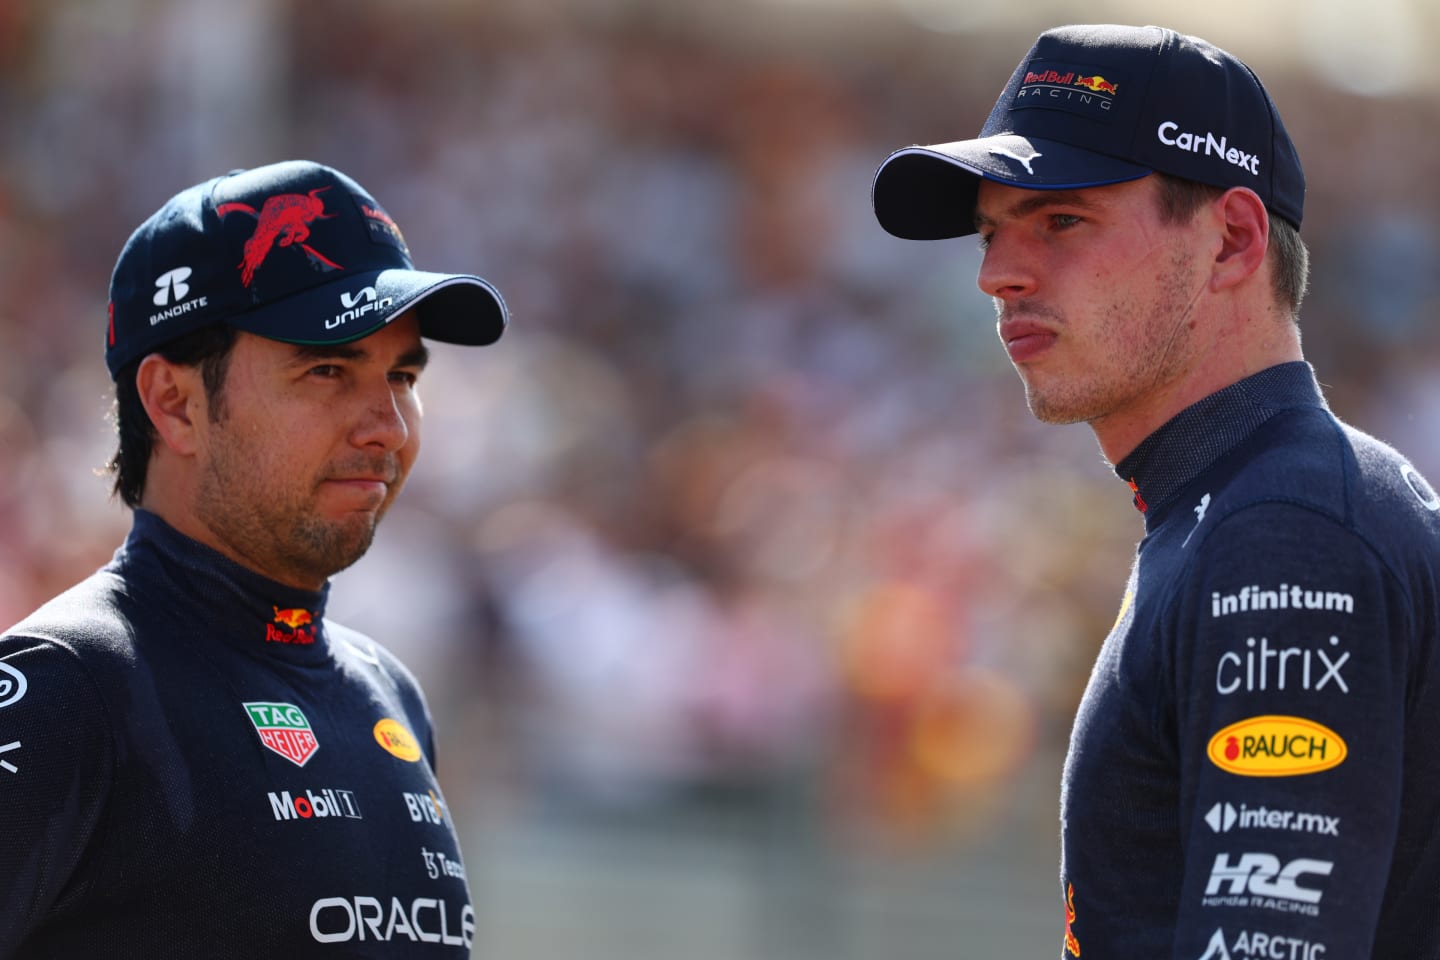 LE CASTELLET, FRANCE - JULY 23: Second placed qualifier Max Verstappen of the Netherlands and Oracle Red Bull Racing and Third placed qualifier Sergio Perez of Mexico and Oracle Red Bull Racing talk in parc ferme during qualifying ahead of the F1 Grand Prix of France at Circuit Paul Ricard on July 23, 2022 in Le Castellet, France. (Photo by Mark Thompson/Getty Images)